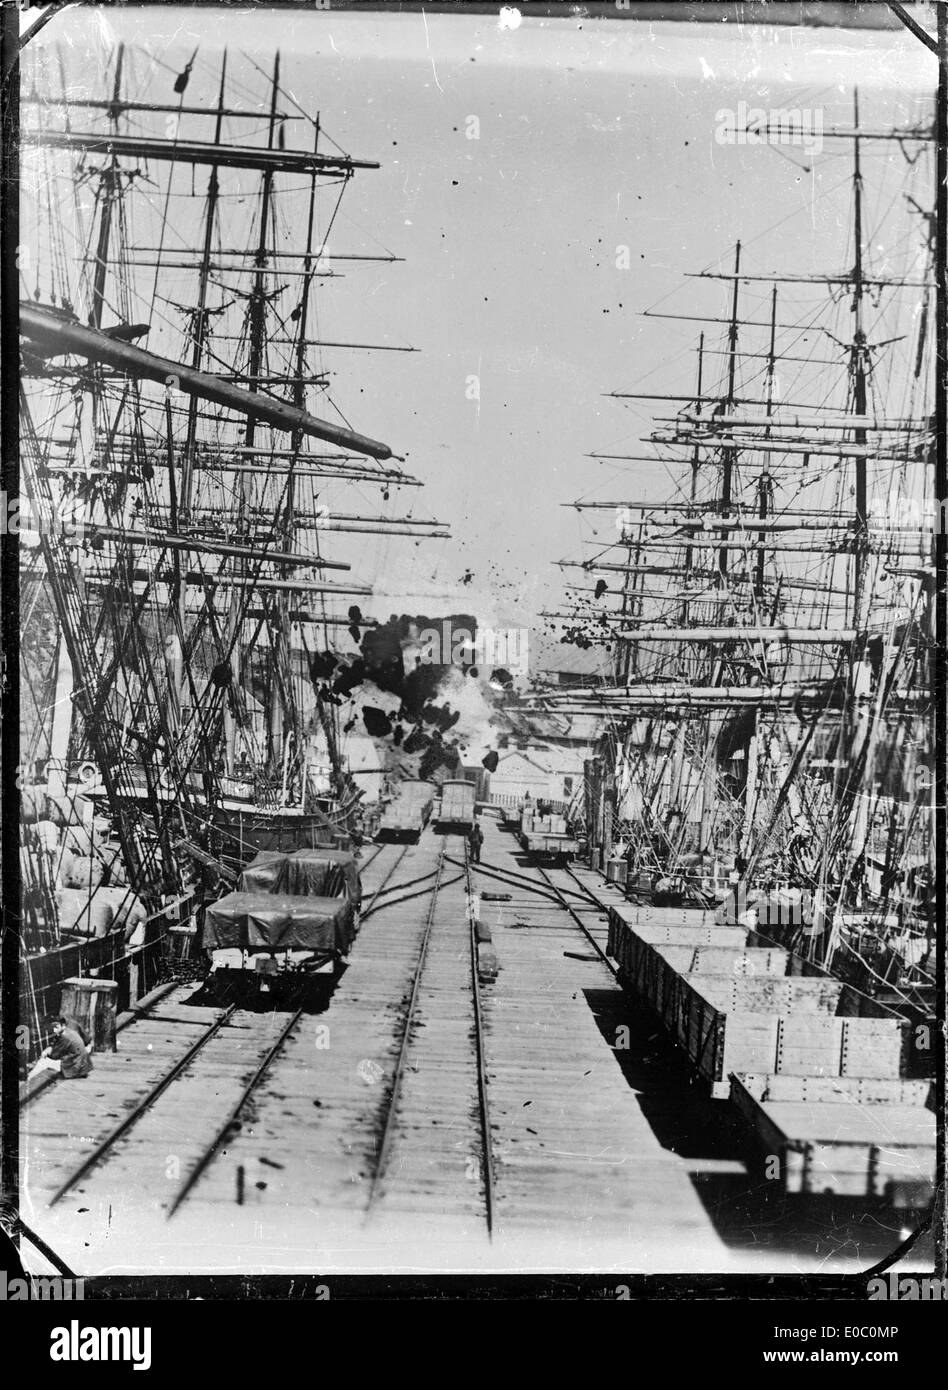 Close-up view of a Port Chalmers wharf and ships loading, 1870s Stock Photo